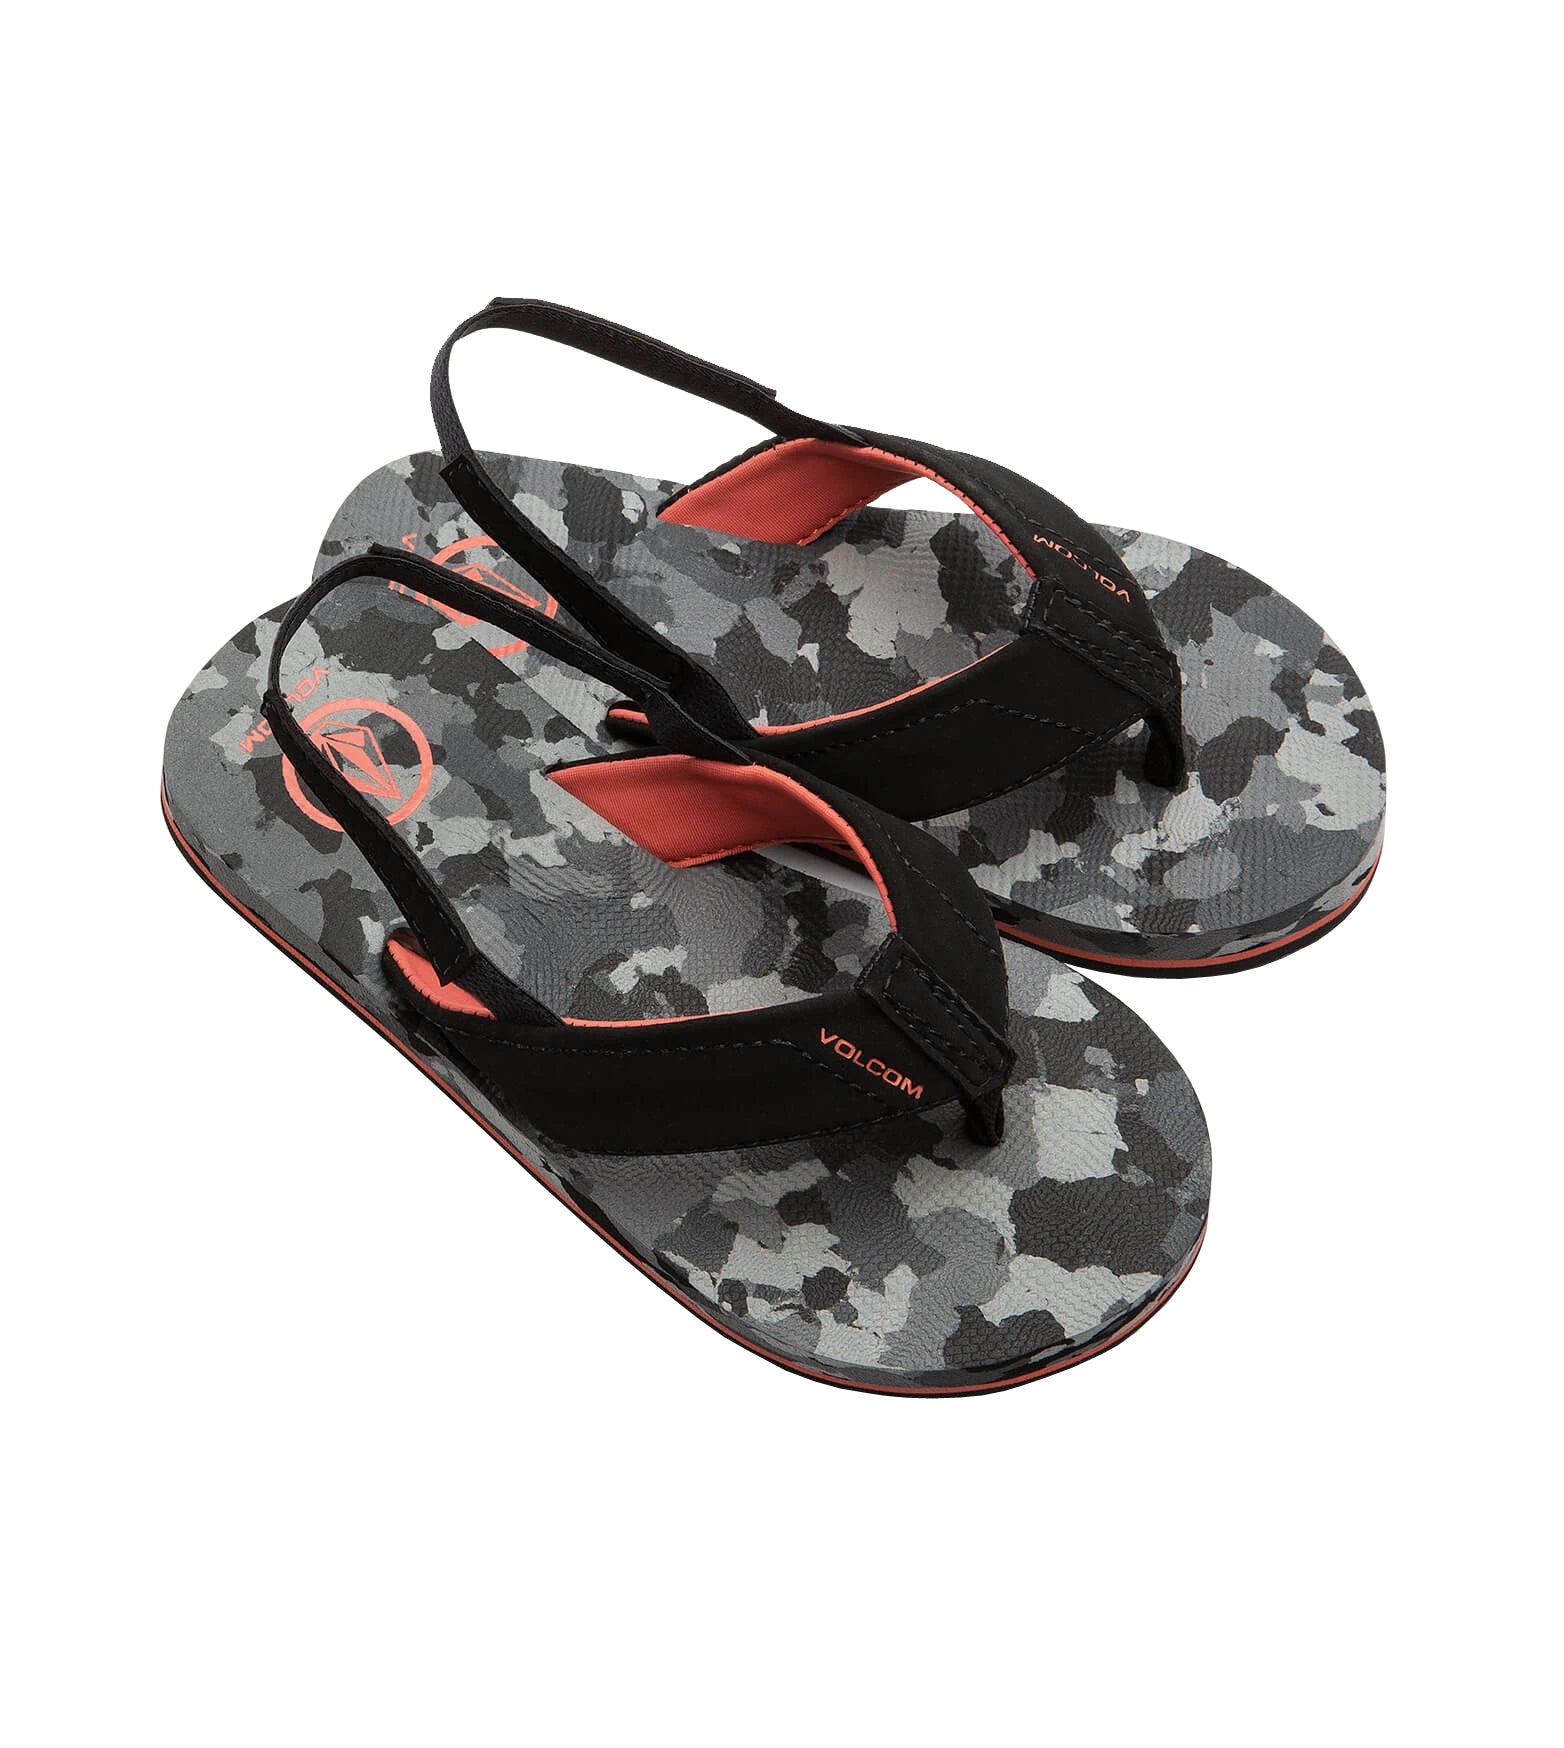 Volcom Victor Little Youth Boys Sandal CAM-Camouflage 12 C